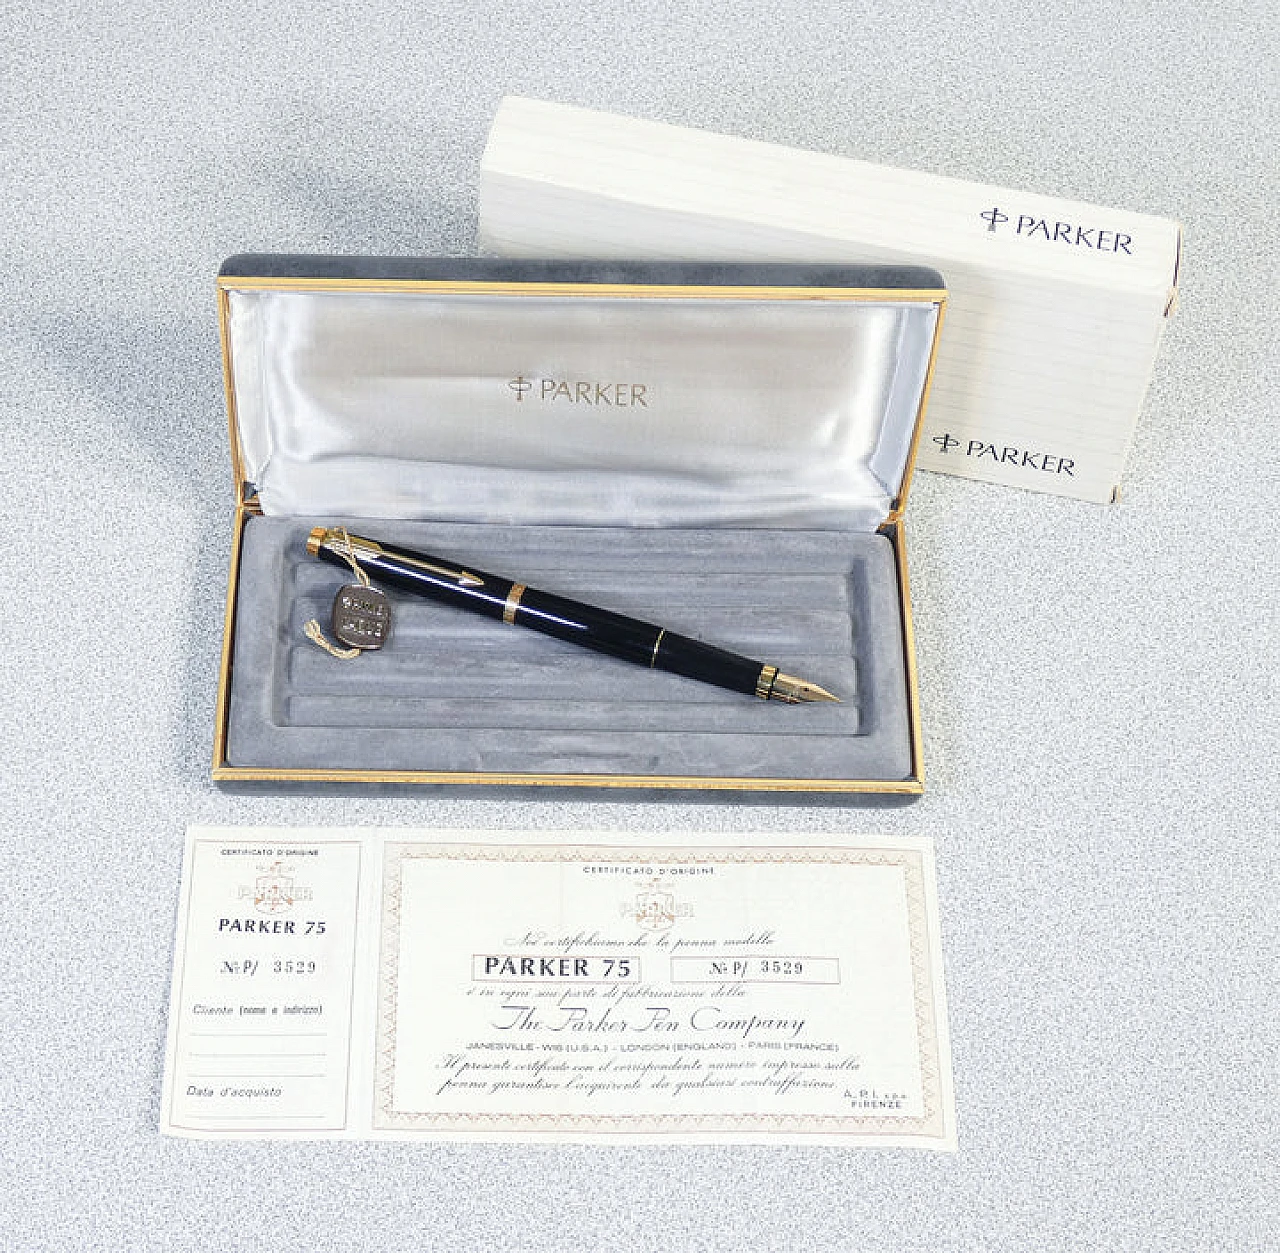 Parker 75 fountain pen with case, 1960s 1